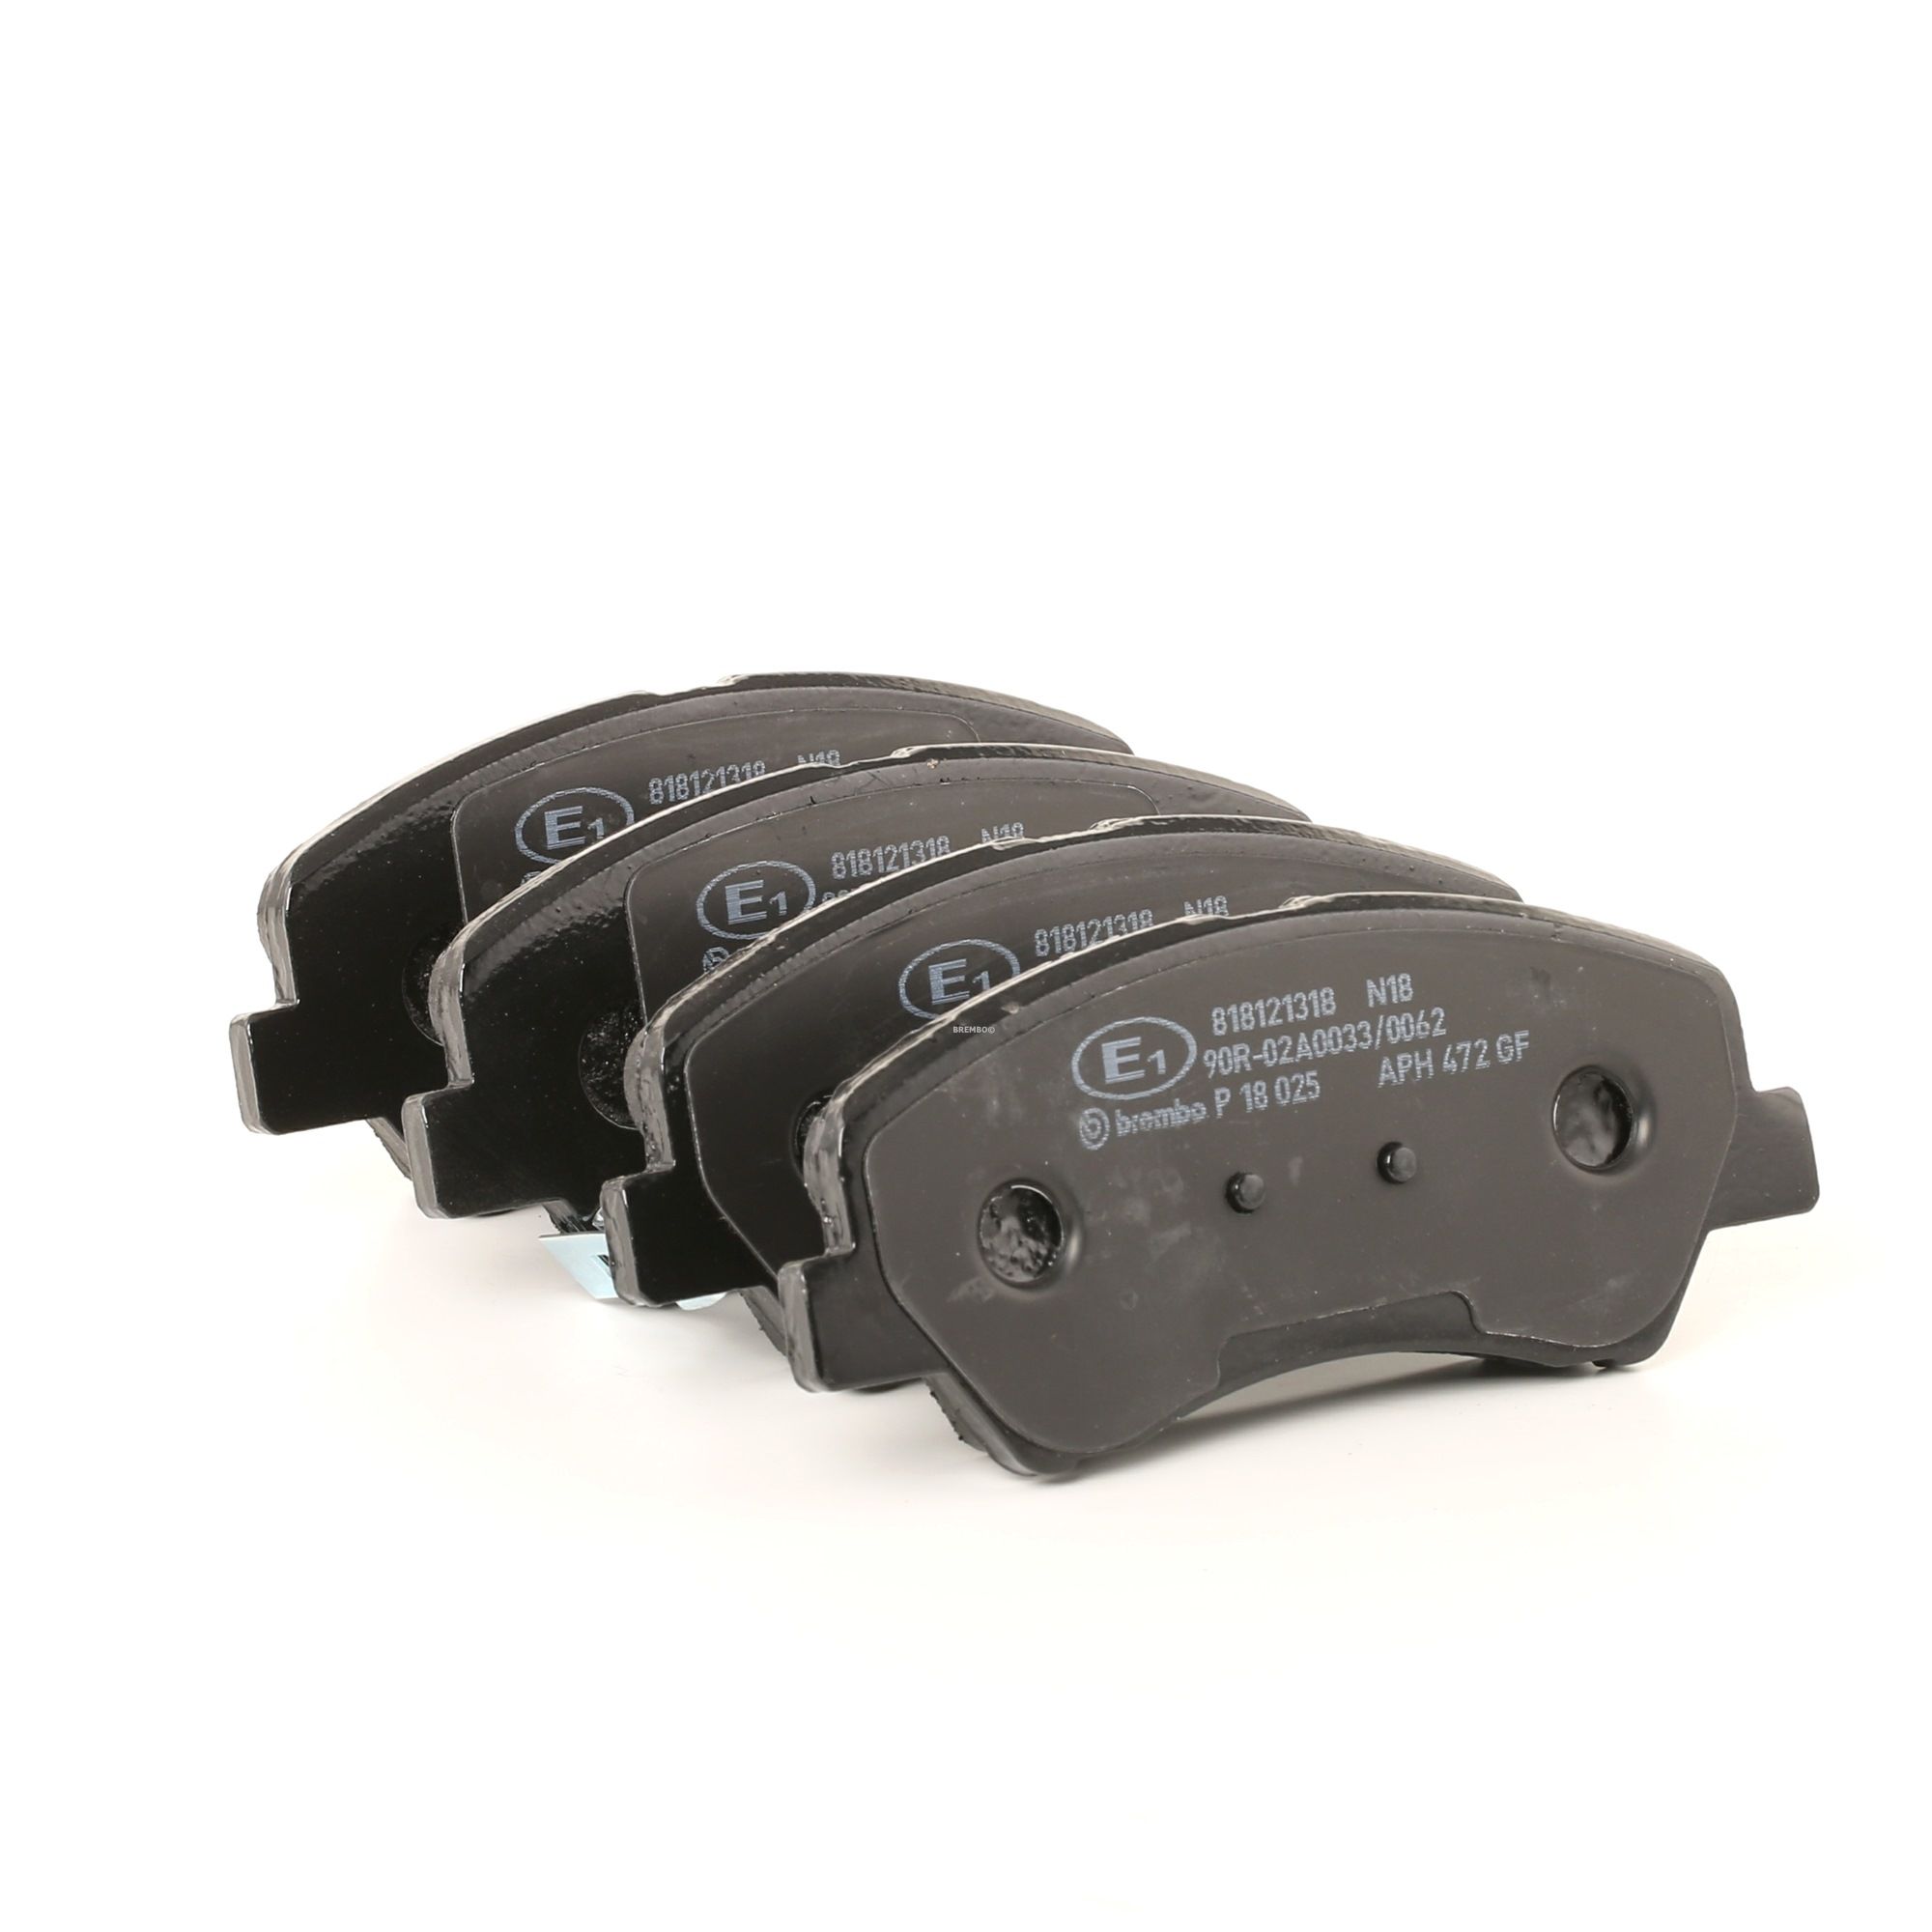 25348 BREMBO with acoustic wear warning, with accessories Height: 58mm, Width: 133mm, Thickness: 18mm Brake pads P 18 025 buy